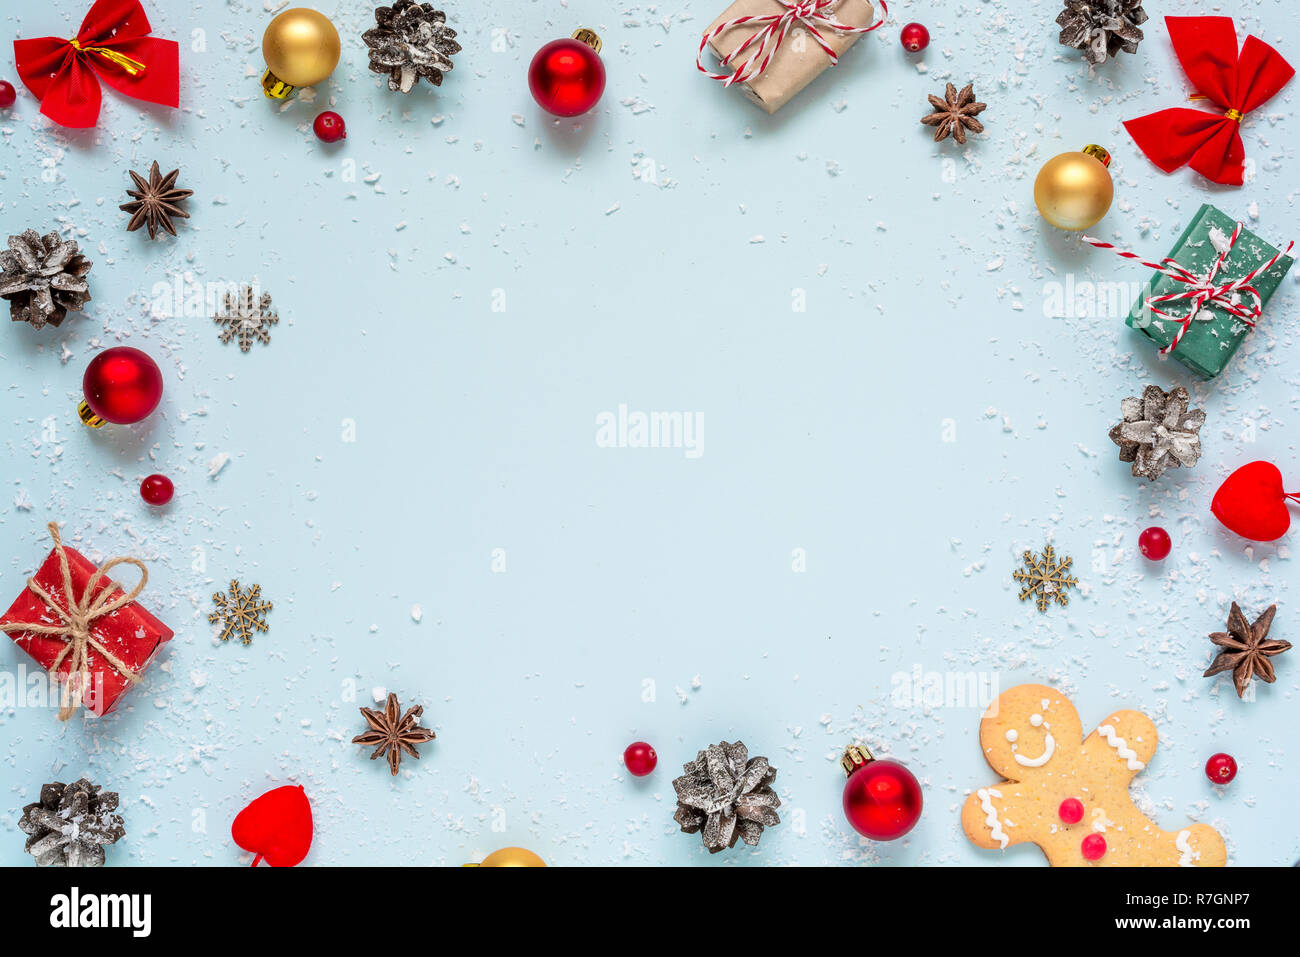 Christmas composition. frame made of christmas decorations, red berries, gift boxes and pine cones on blue background. Christmas background. Flat lay. Stock Photo